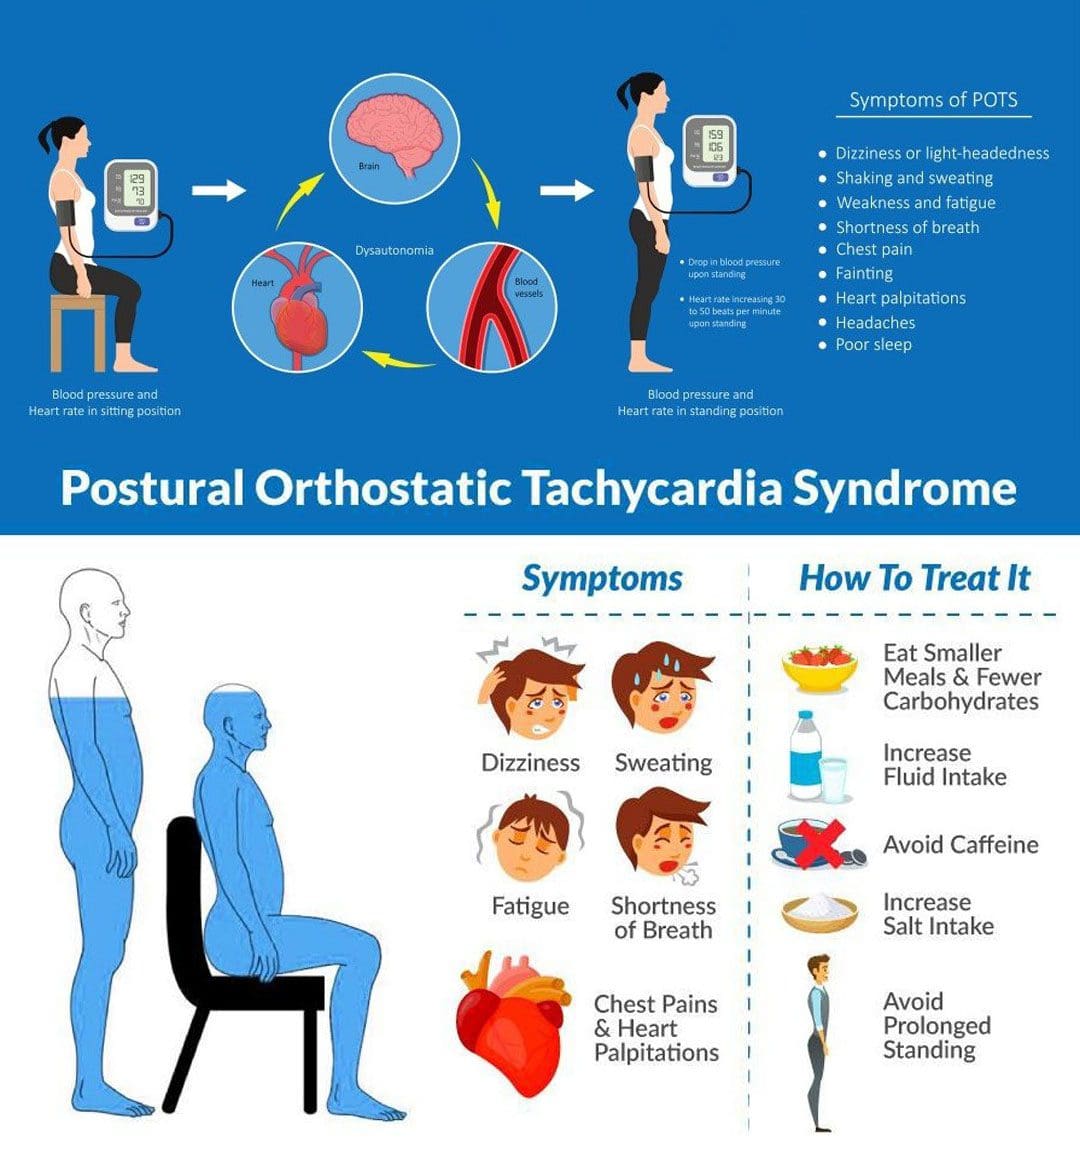 Understanding Postural Orthostatic Tachycardia Syndrome (POTS)